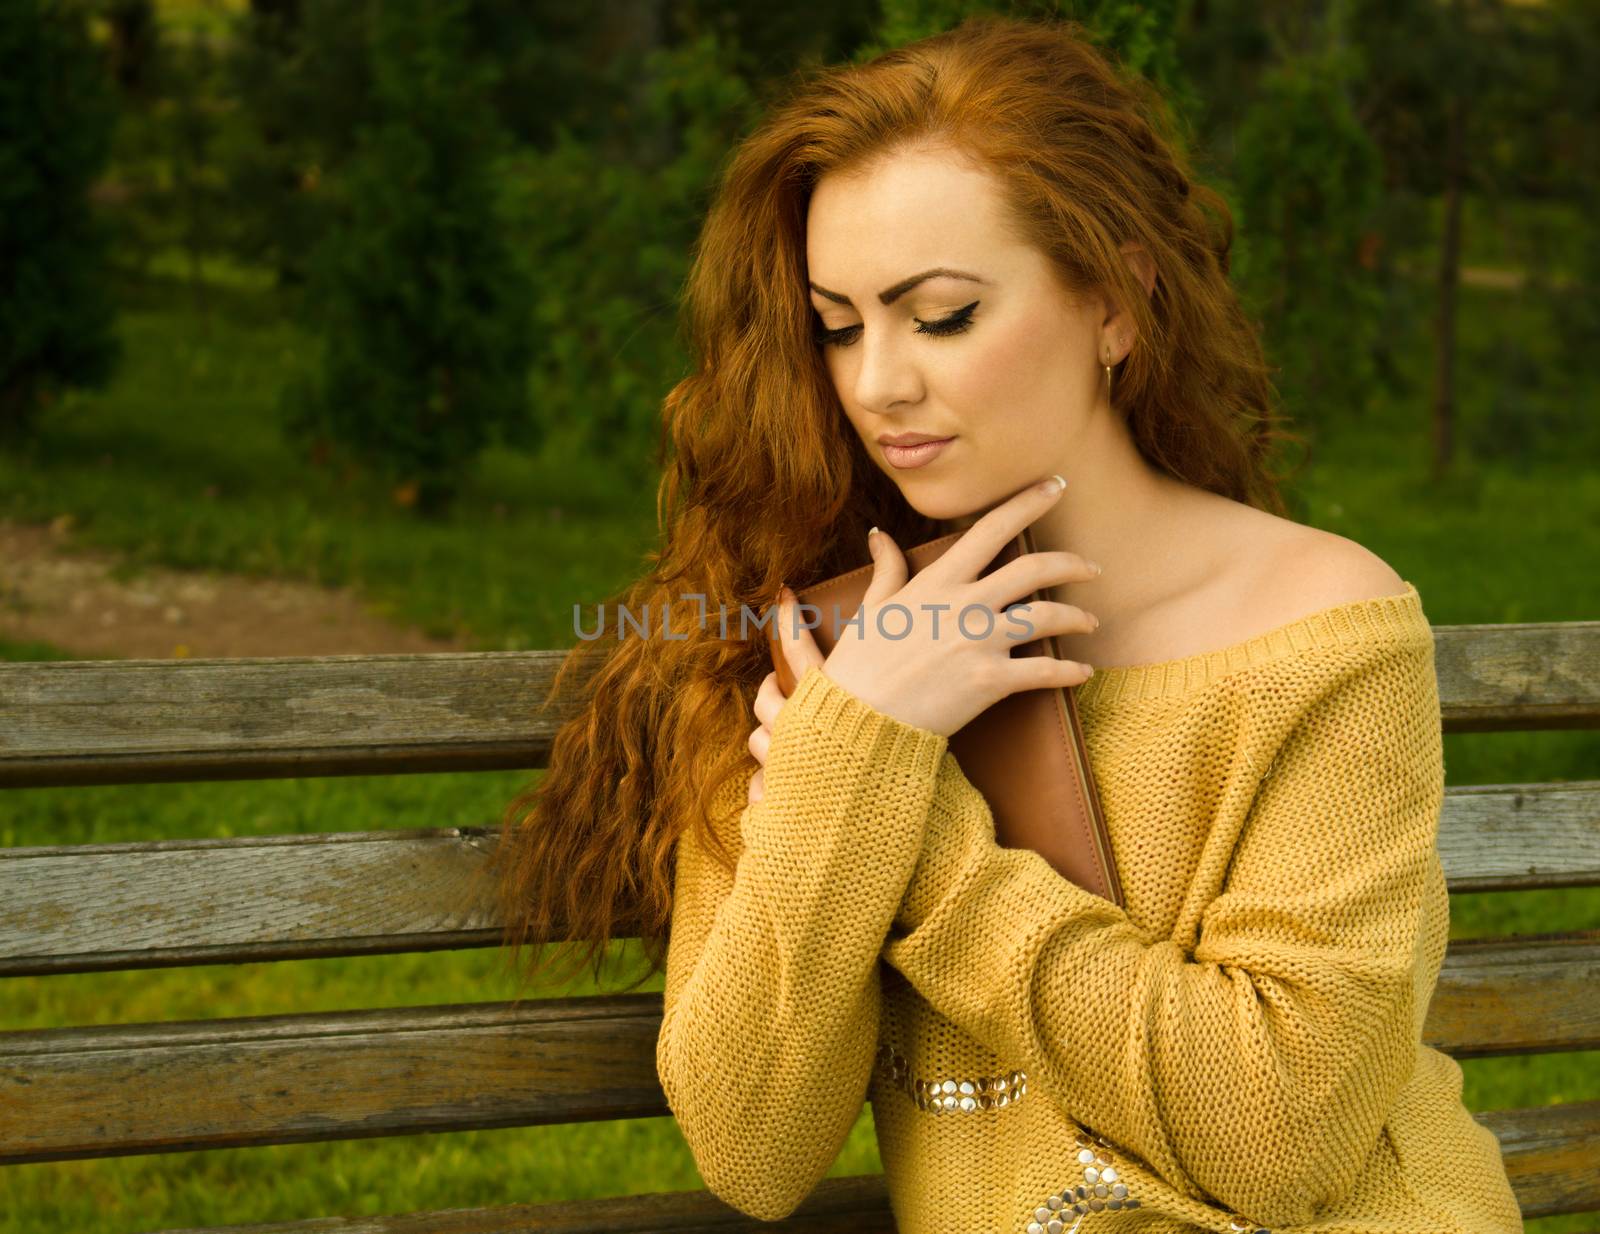 Ginger-haired woman sitting on a bench with book in the park